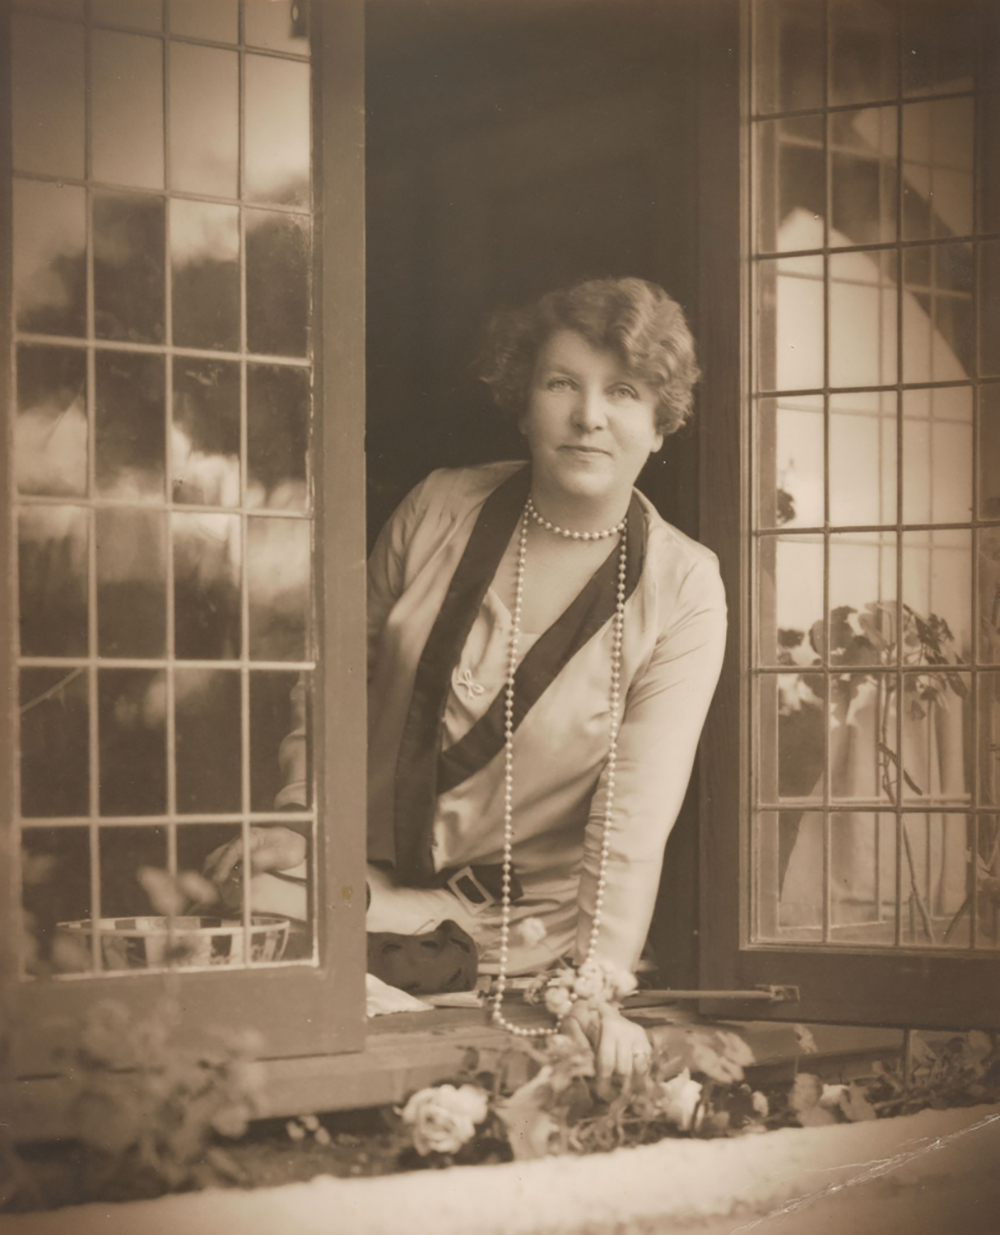 Black and white portrait of Ethel Turner sitting on a windowsill looking outside. There are flowers just outside the windowsill and she is wearing a long sleeve top and a long pearl necklace.